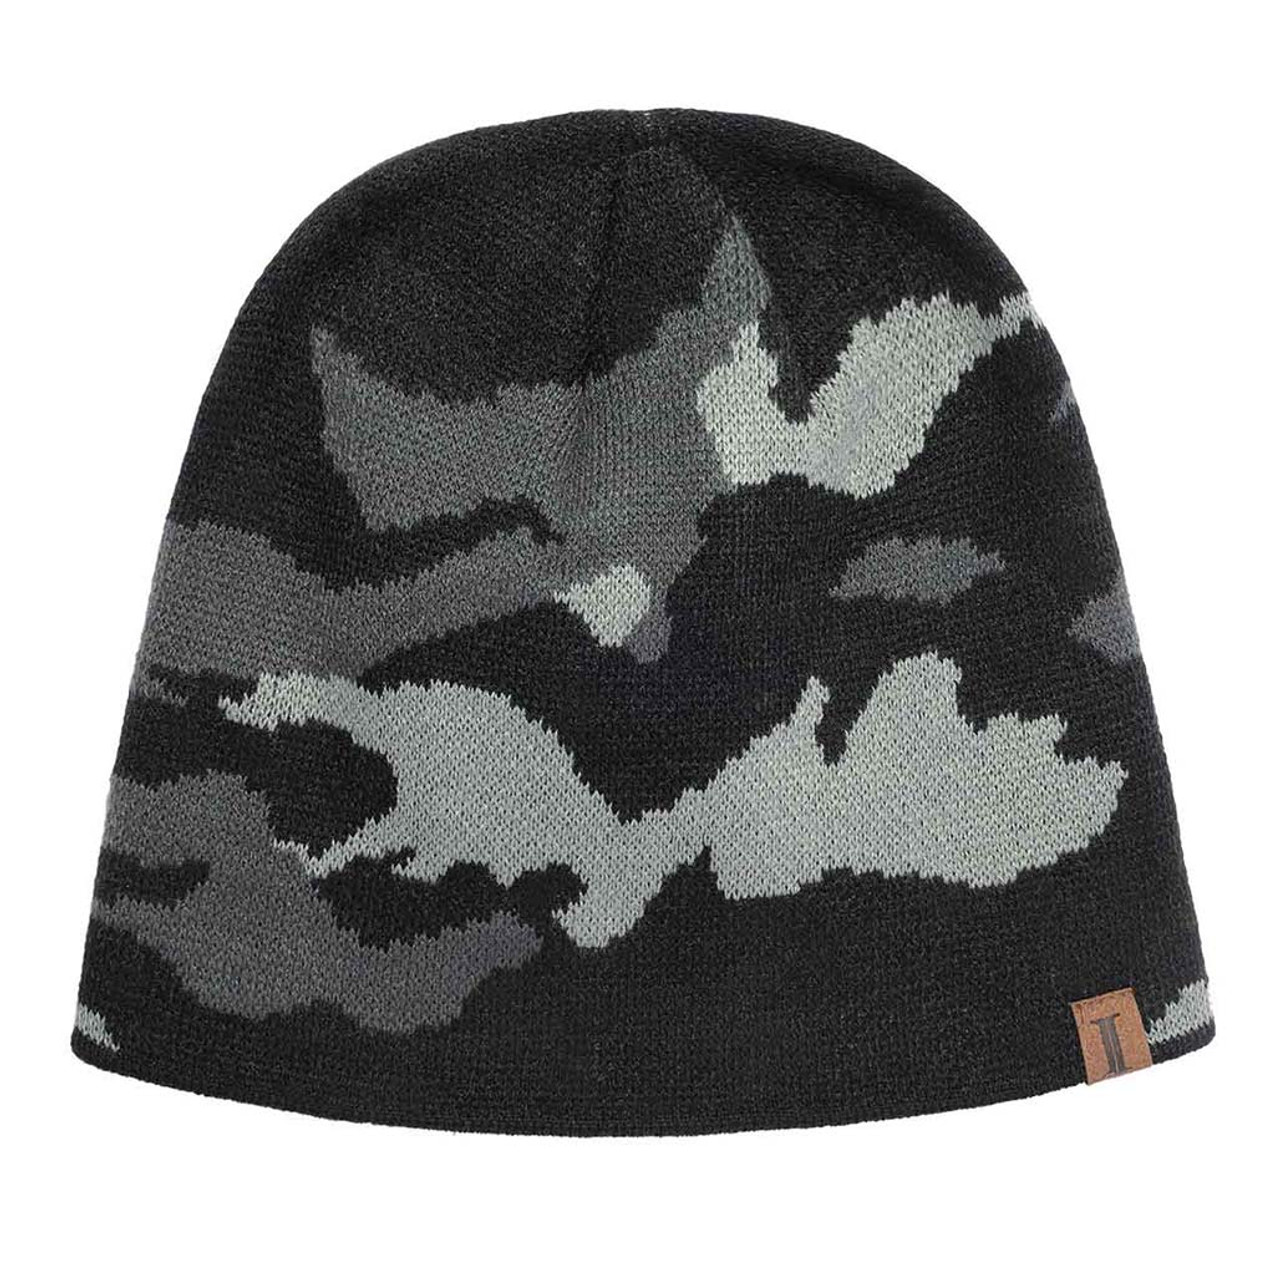 Igloo Men's Camo Beanie - 6th Avenue Outfitters Co-op